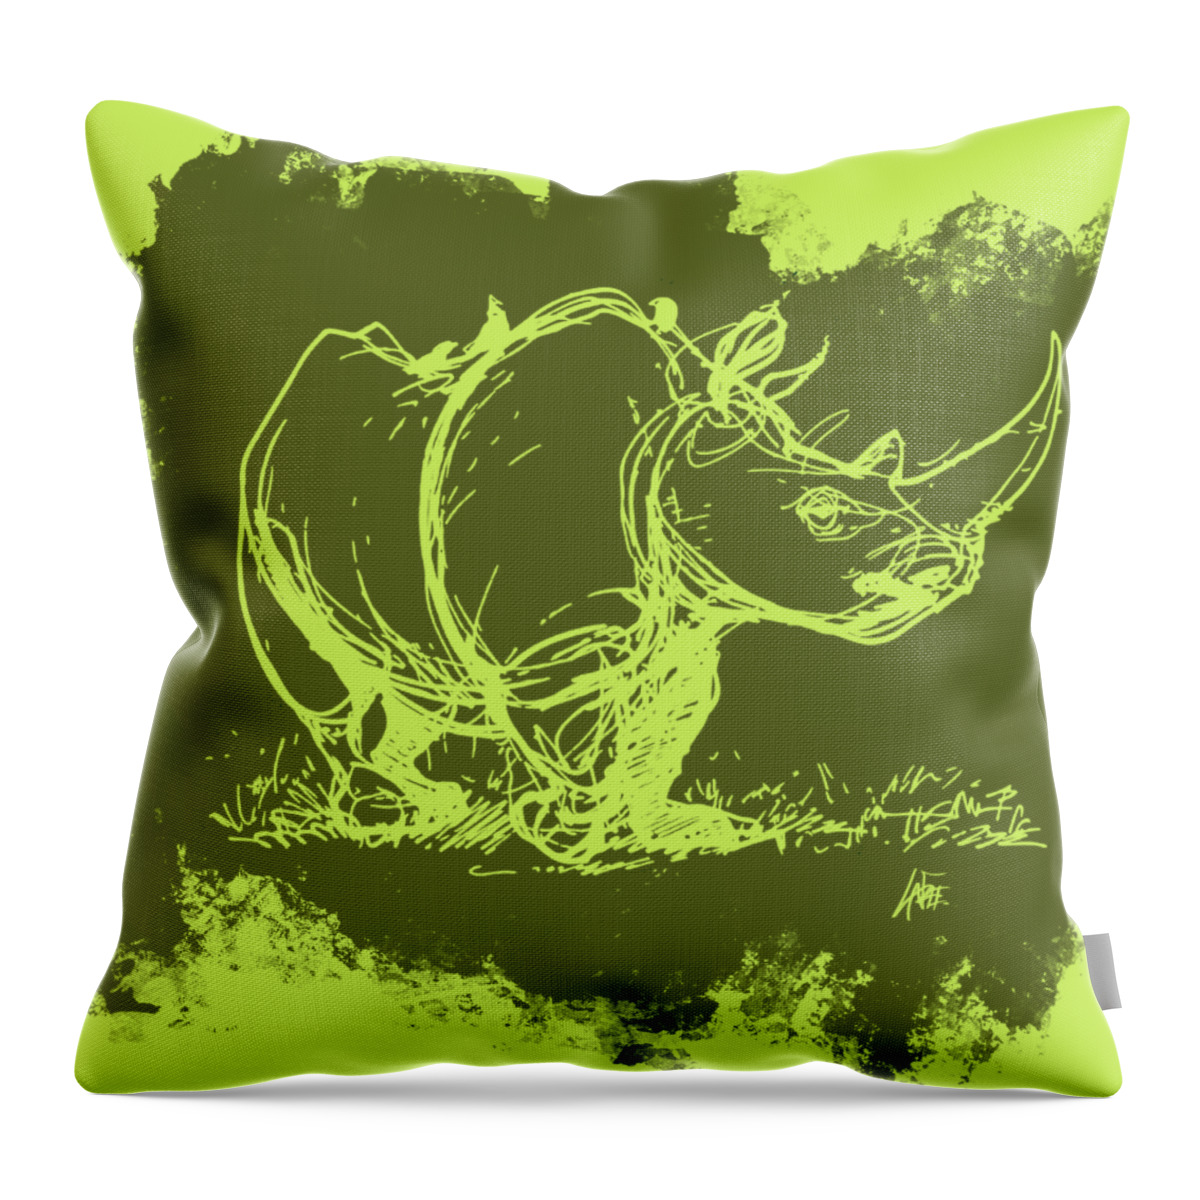 Rhino Throw Pillow featuring the drawing Rhinoceros Gesture Sketch by John LaFree